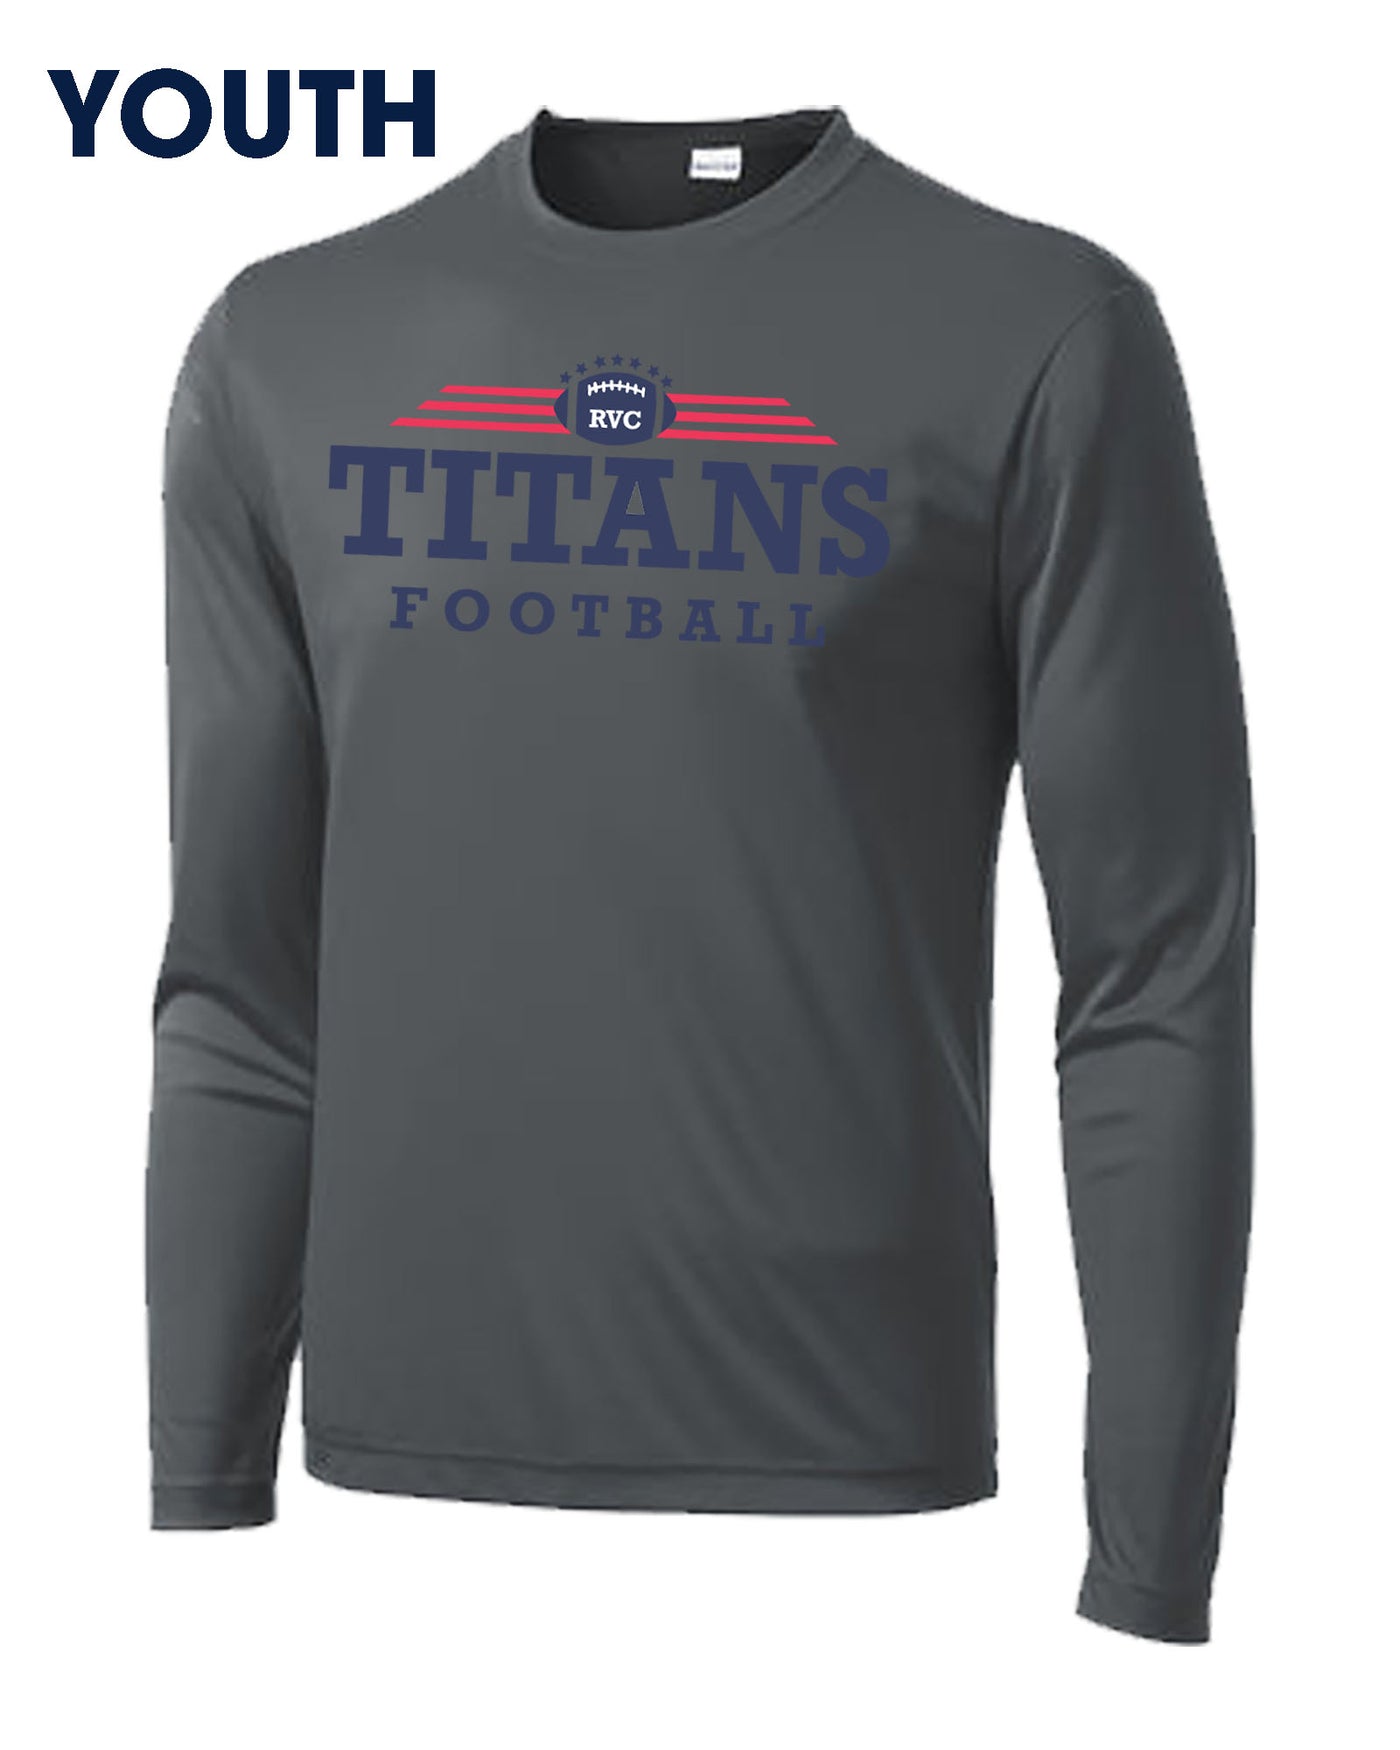 YOUTH Titans Gameday Long Sleeve Moisture Wicking Performance T Shirt